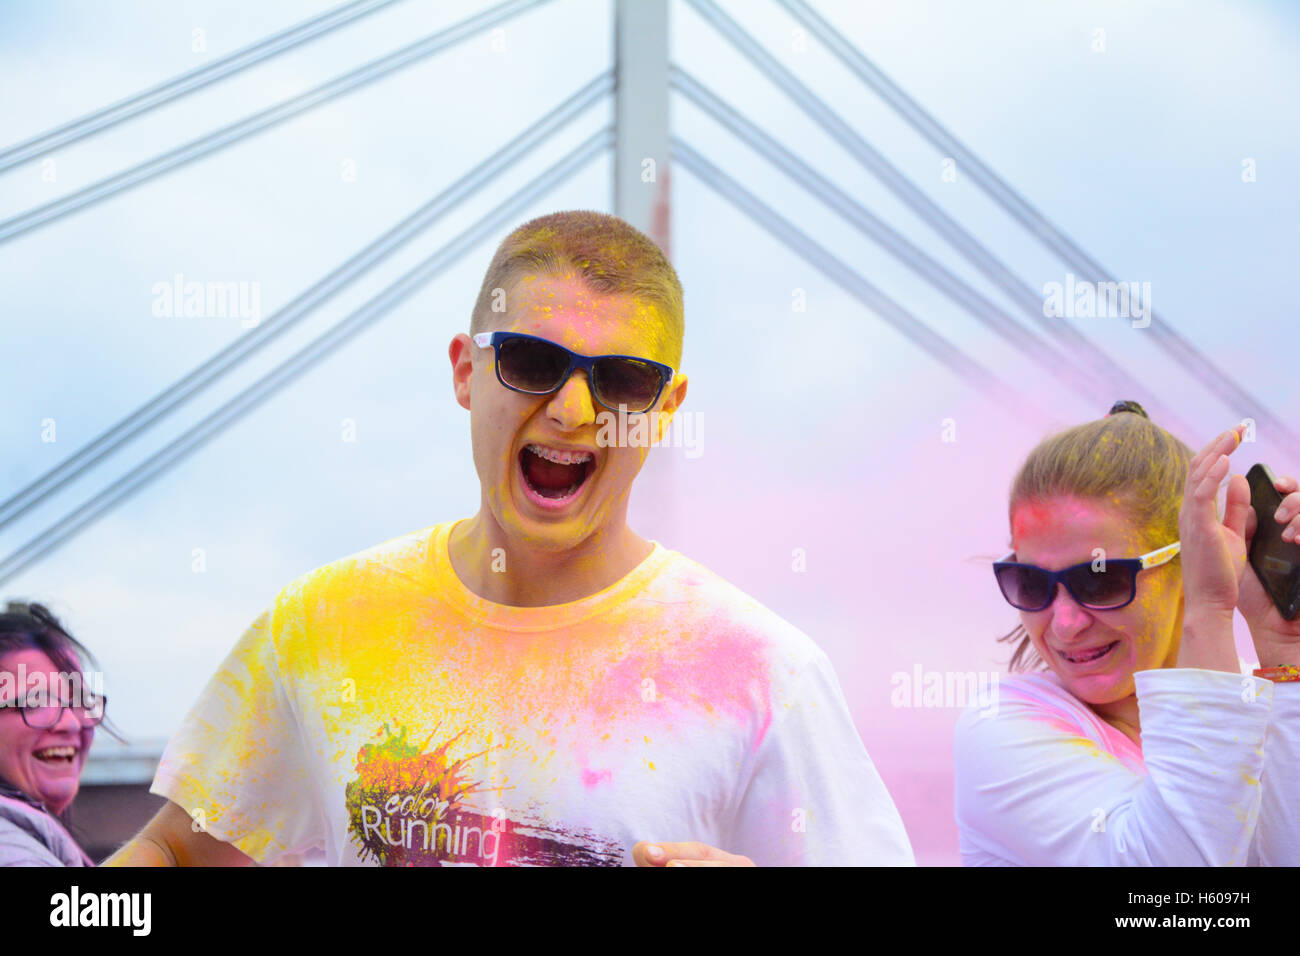 The Color running race. Stock Photo